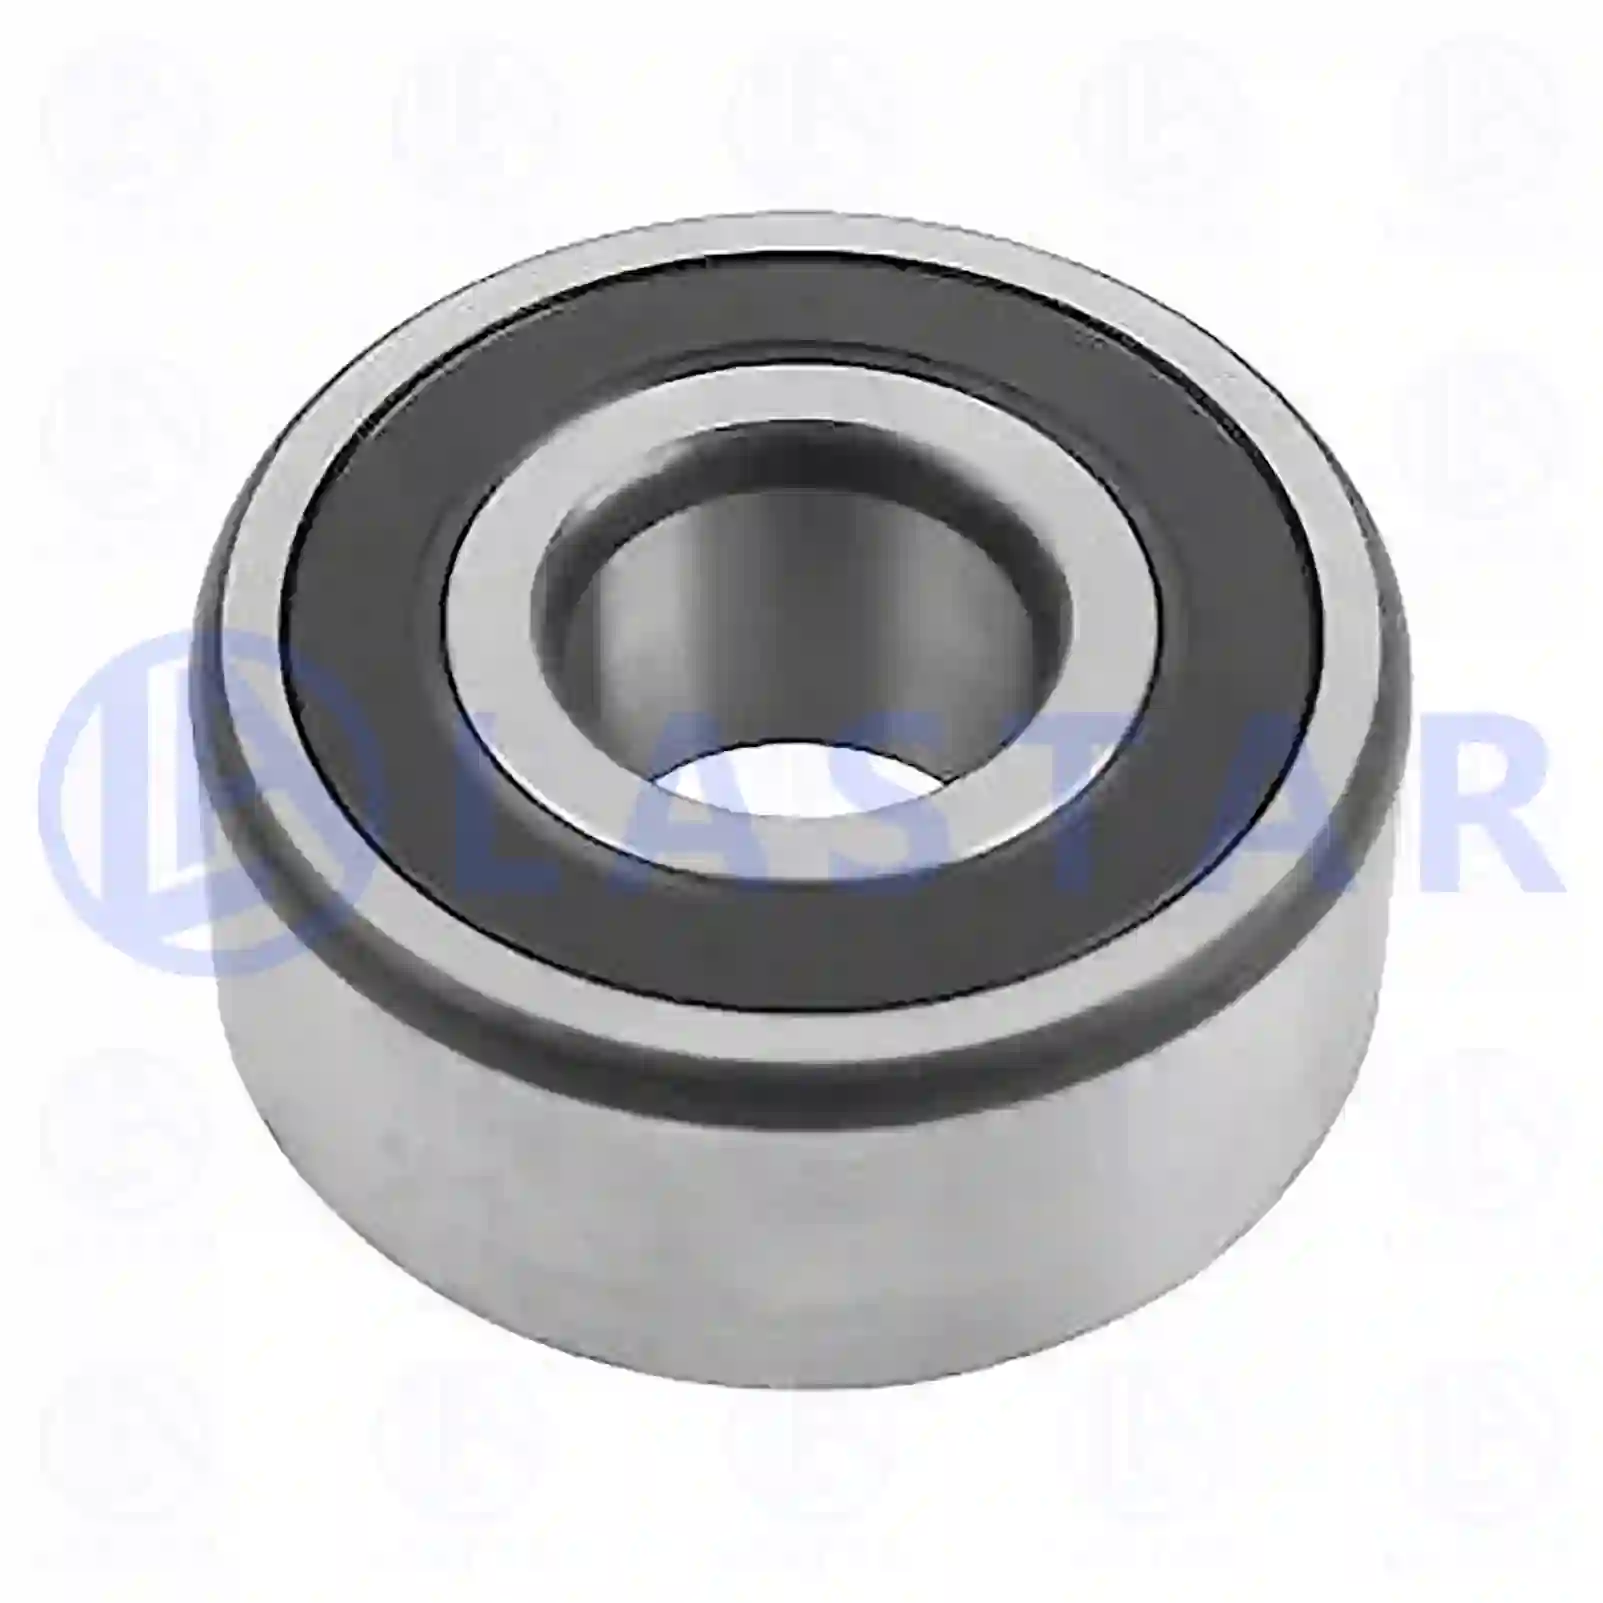  Ball bearing || Lastar Spare Part | Truck Spare Parts, Auotomotive Spare Parts